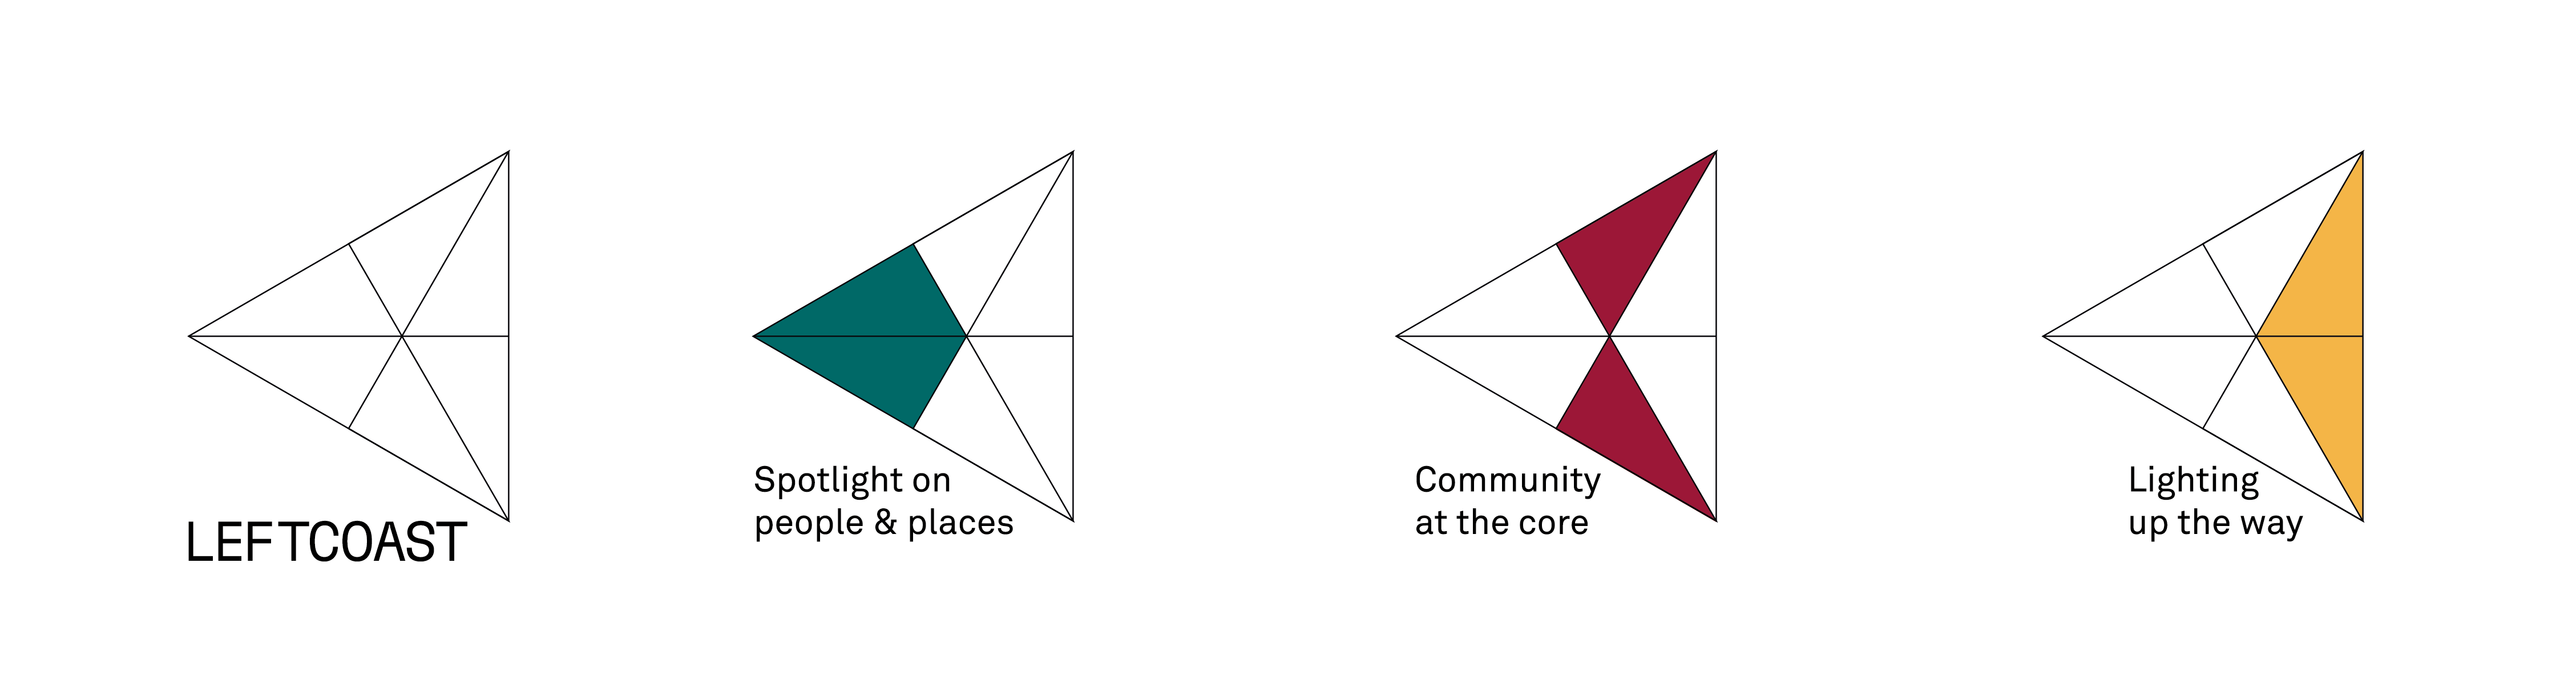 A graphic explaining the design of the LeftCoast logo featuring a row of 4 iterations of the logo. The logos is a line drawing of an equilateral triangle pointing to the left. Inside the triangle 3 more lines connect the sides. From left to right, logo 1 is black and white and LeftCoast is written below it. In logo 2, the section of the triangle pointing left (the ‘front’) is green and ‘Spotlight on people & places’ is written below it. Logo 3 has the ‘middle’ section coloured in red, with ‘Community at the core’ written below it. The final logo has the ‘back’ section coloured in yellow, with the words ‘Lighting up the way’ written below it.